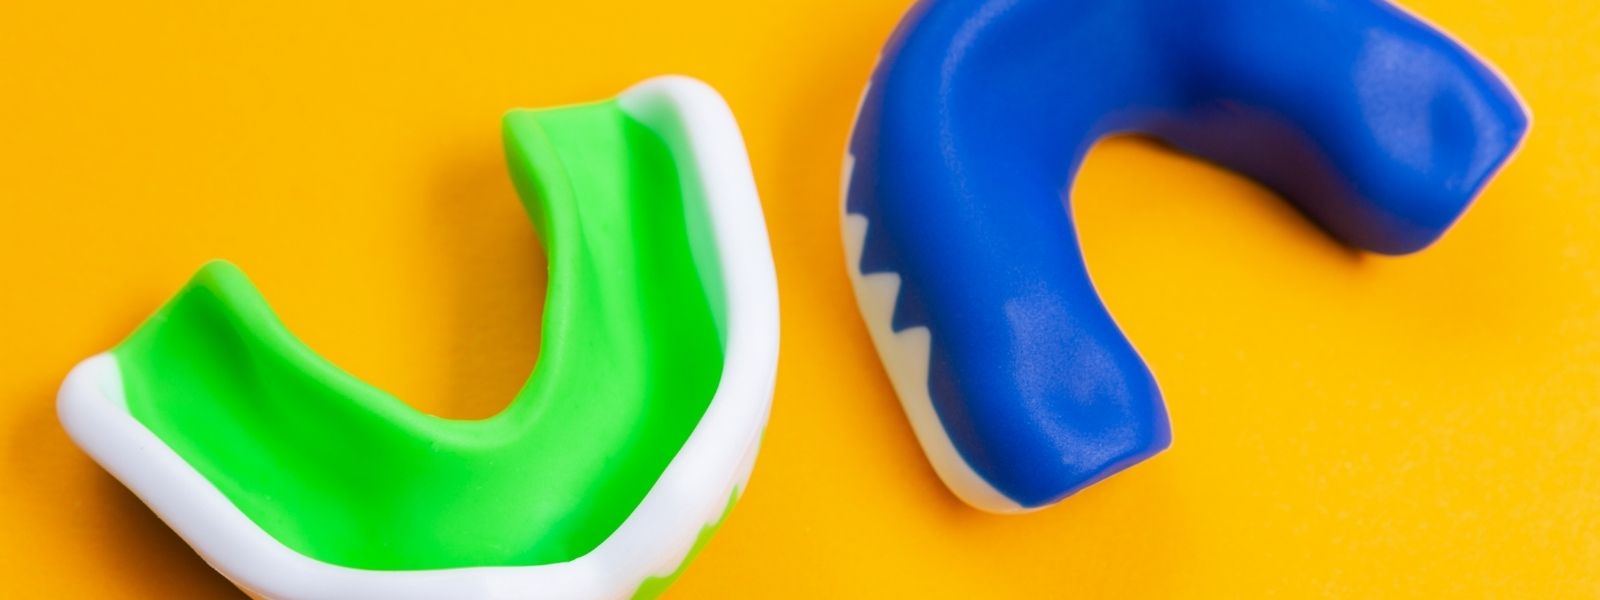 Colourful Custom made Mouthguards on yellow background.